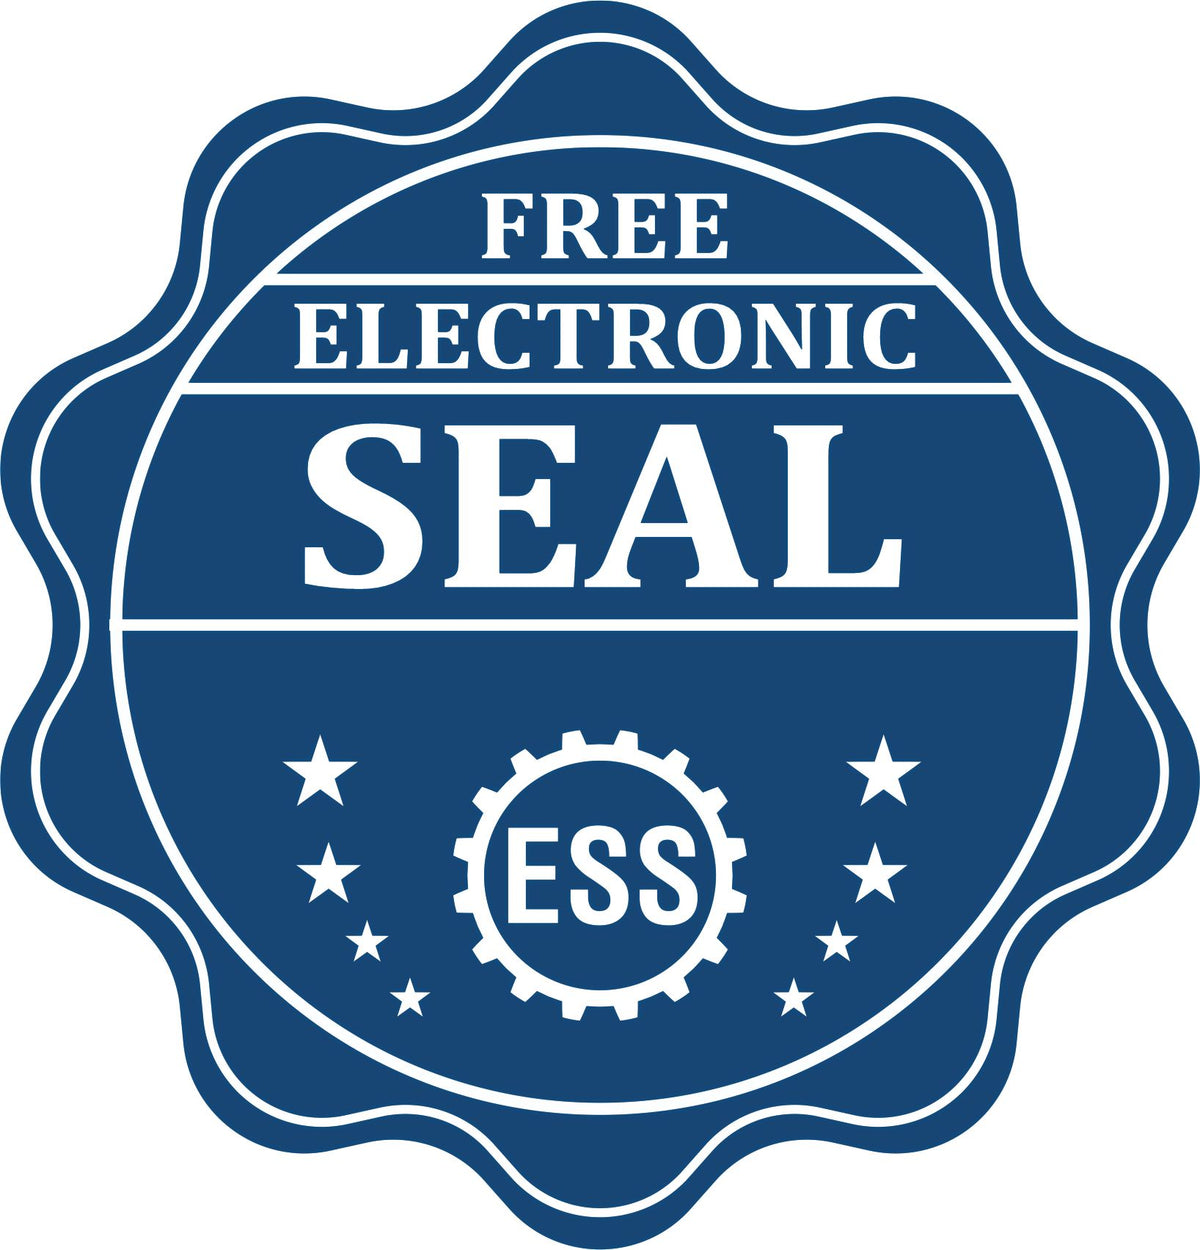 A badge showing a free electronic seal for the Delaware Engineer Desk Seal with stars and the ESS gear on the emblem.